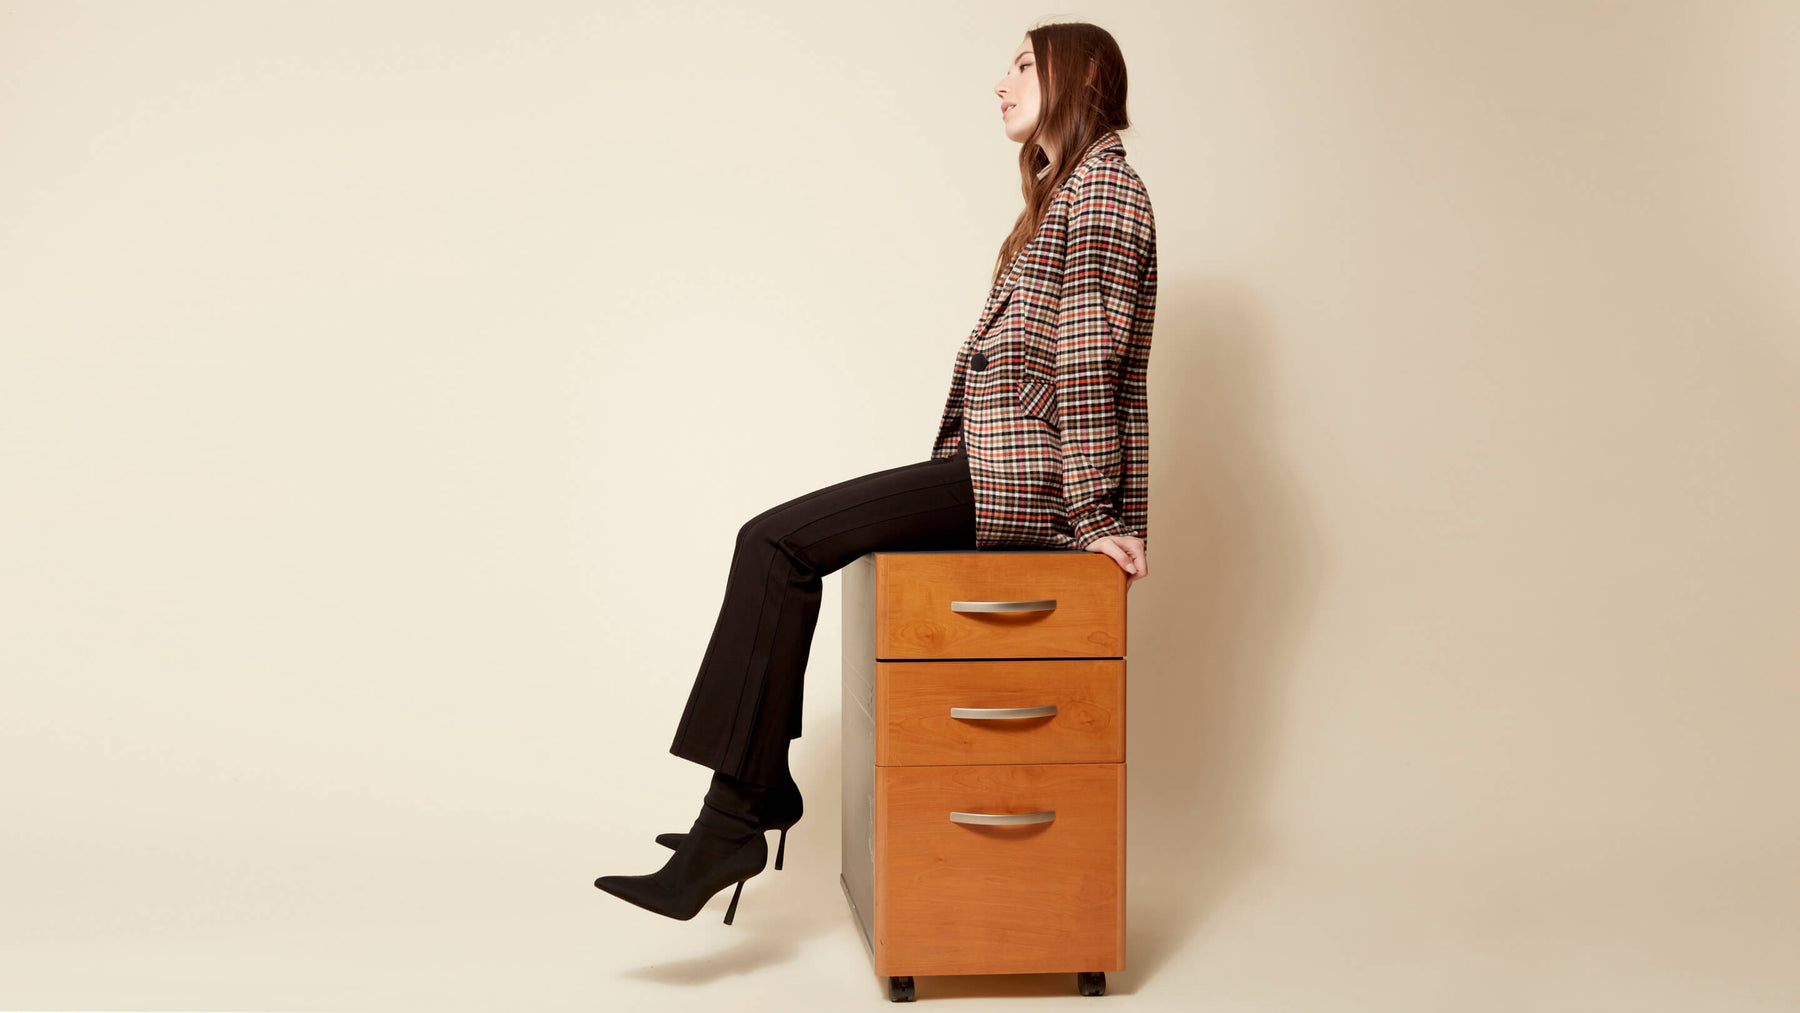 The Workwear Editorial - Women's Work Clothing & Office Outfits - Charlie B Collection Canada